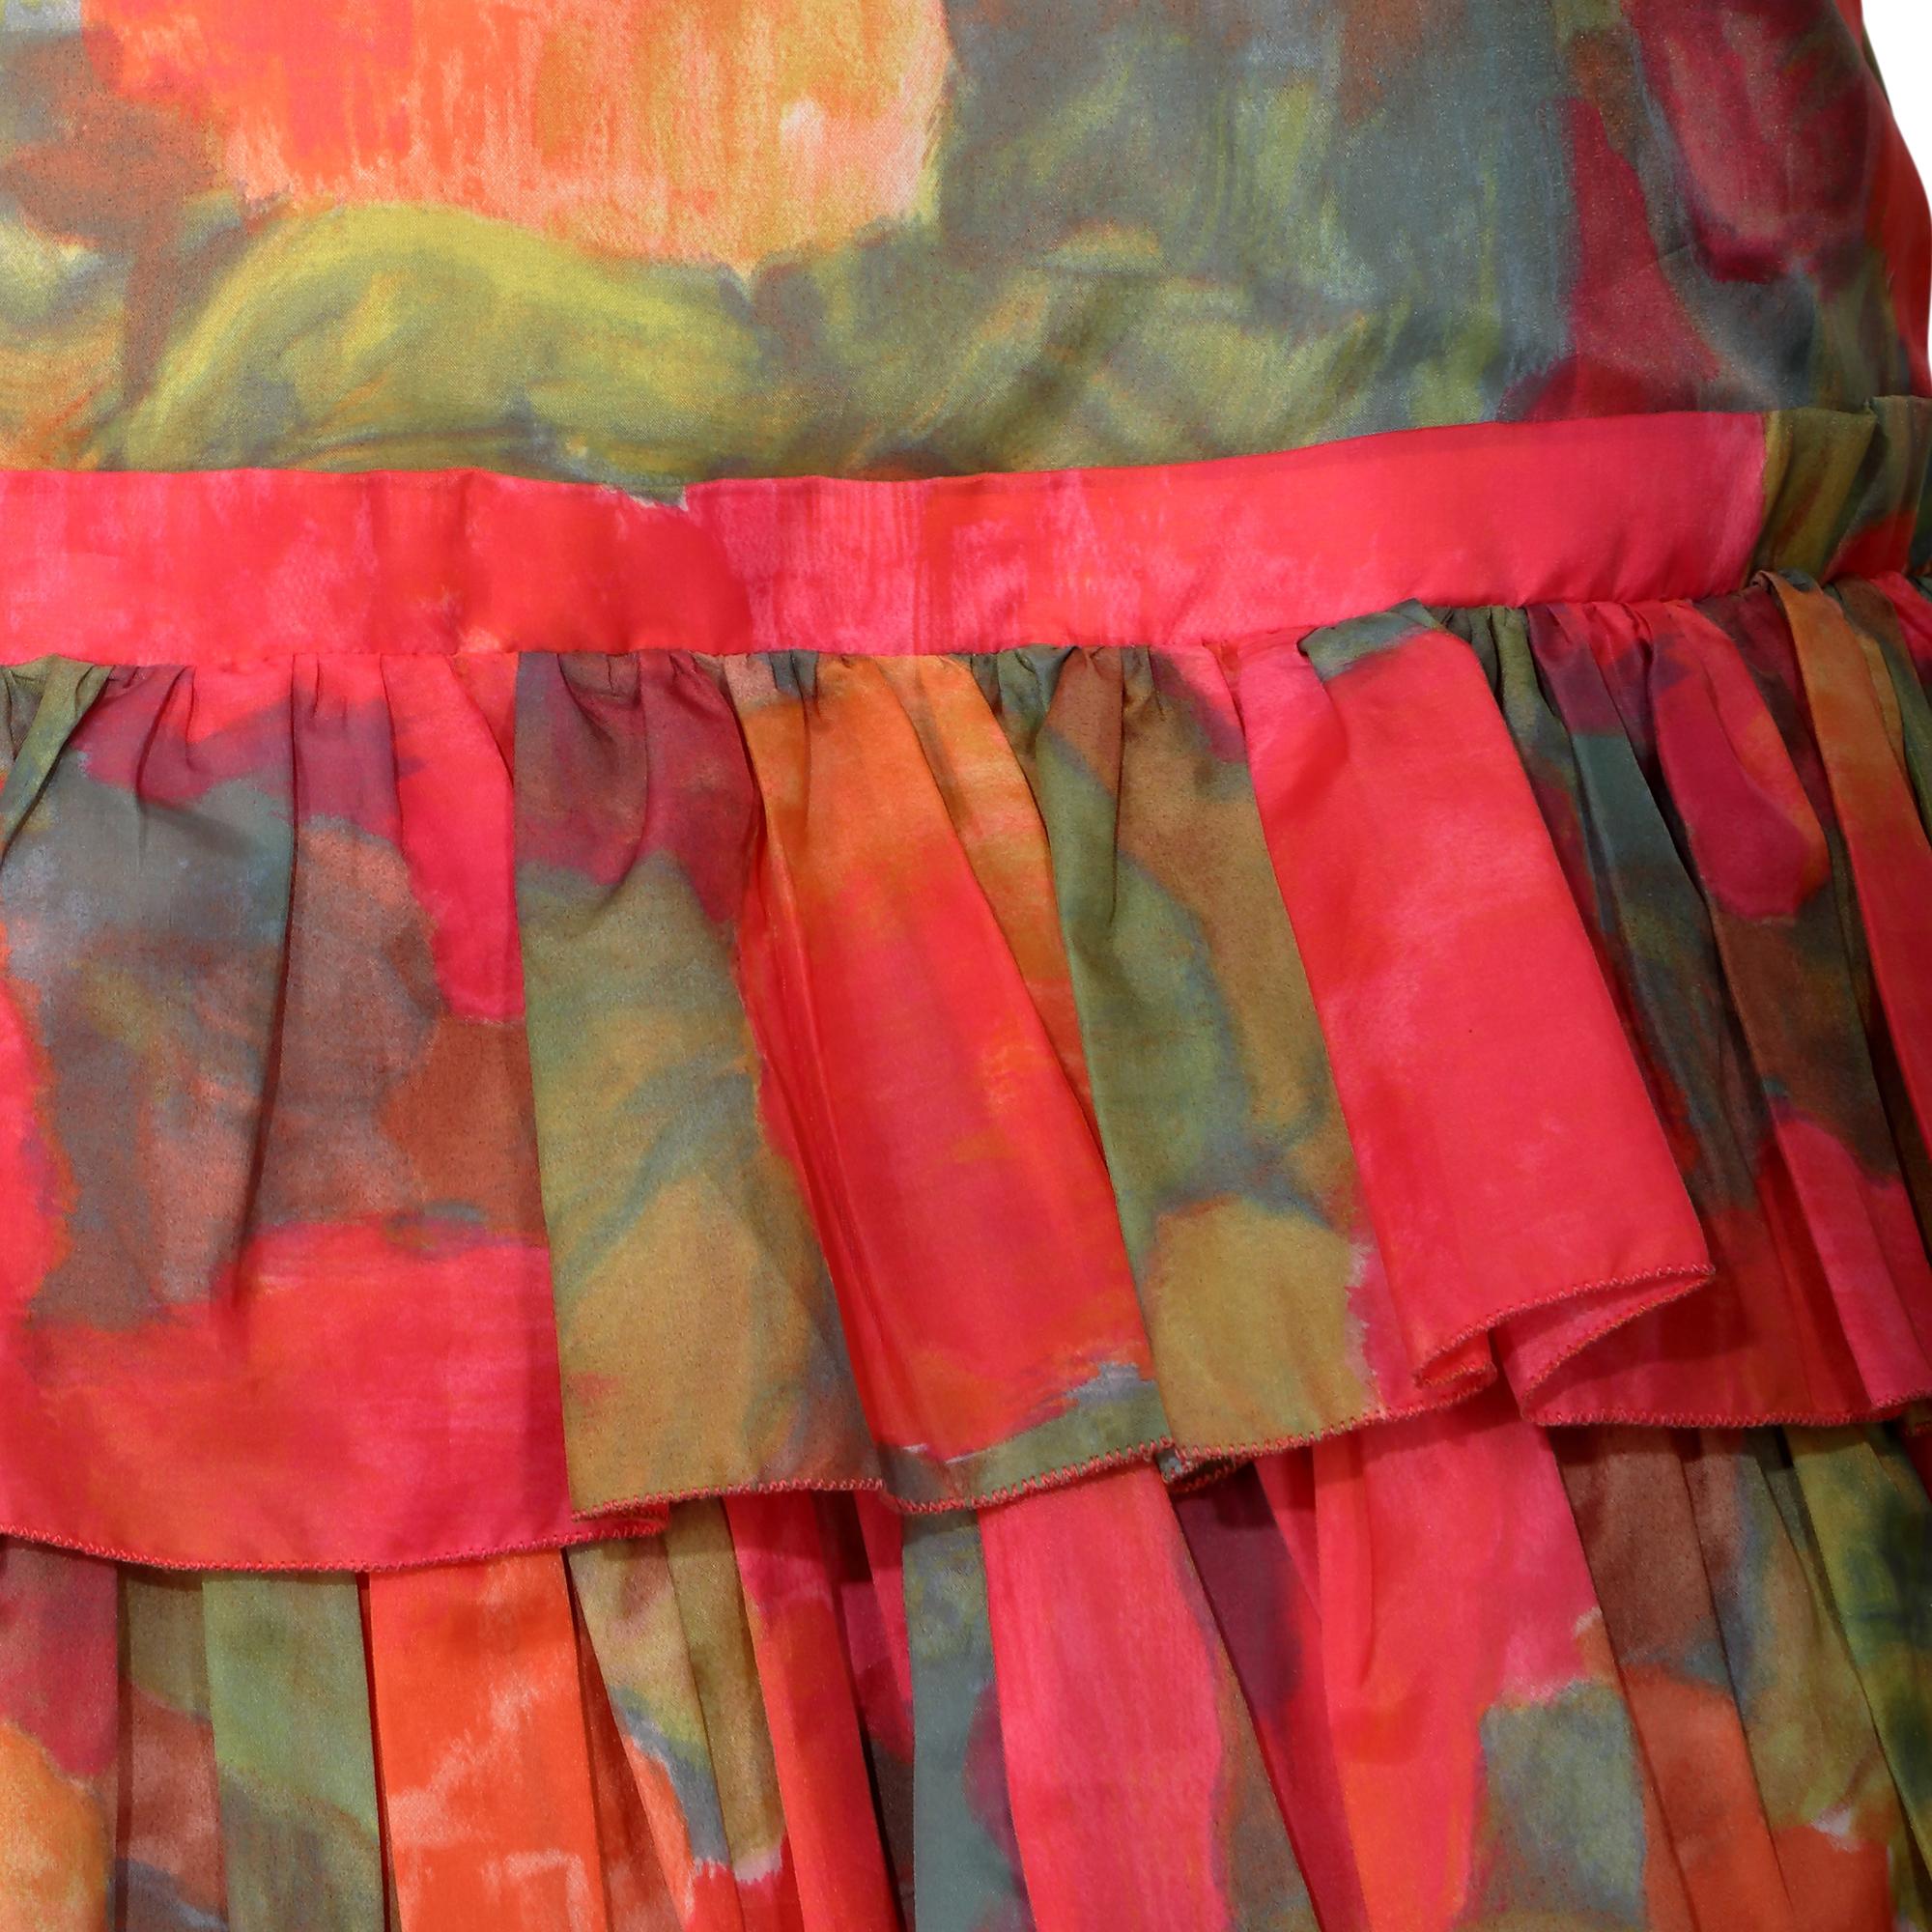 We love the vibrancy of the colours in this original 1960s vintage dress. It appears to be an abstract rose print in warm tones of pinks, oranges and green. The stand out design element of this piece has to be the wonderful triple tiered ruffle